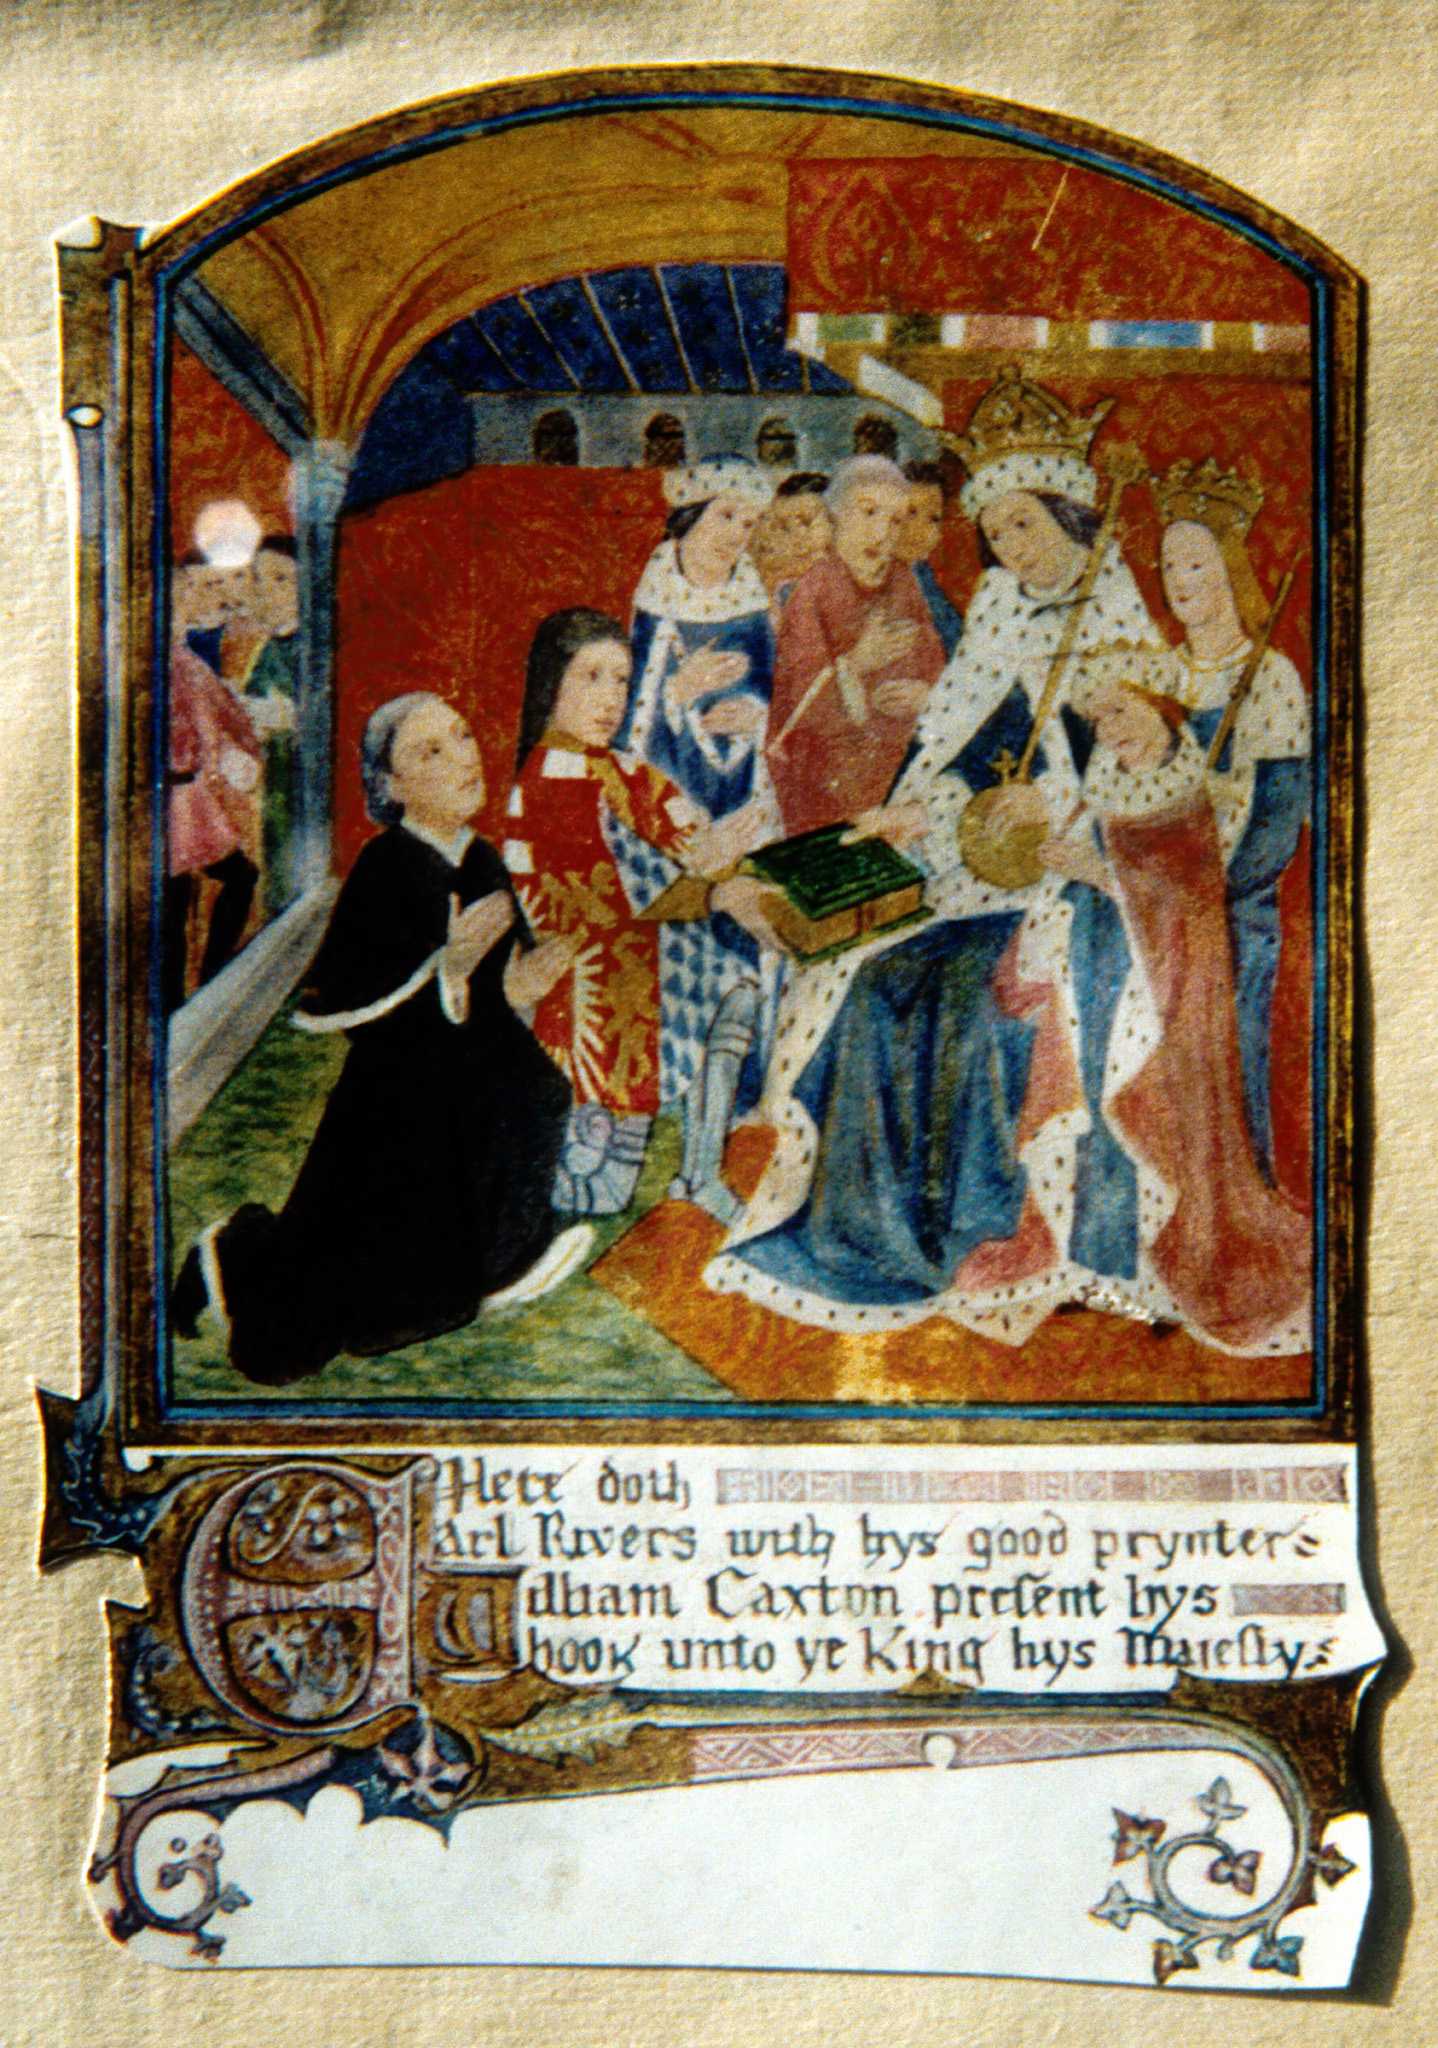 Illustration of royal subjects showing allegiance to nobles and the crown by giving the king a green book..